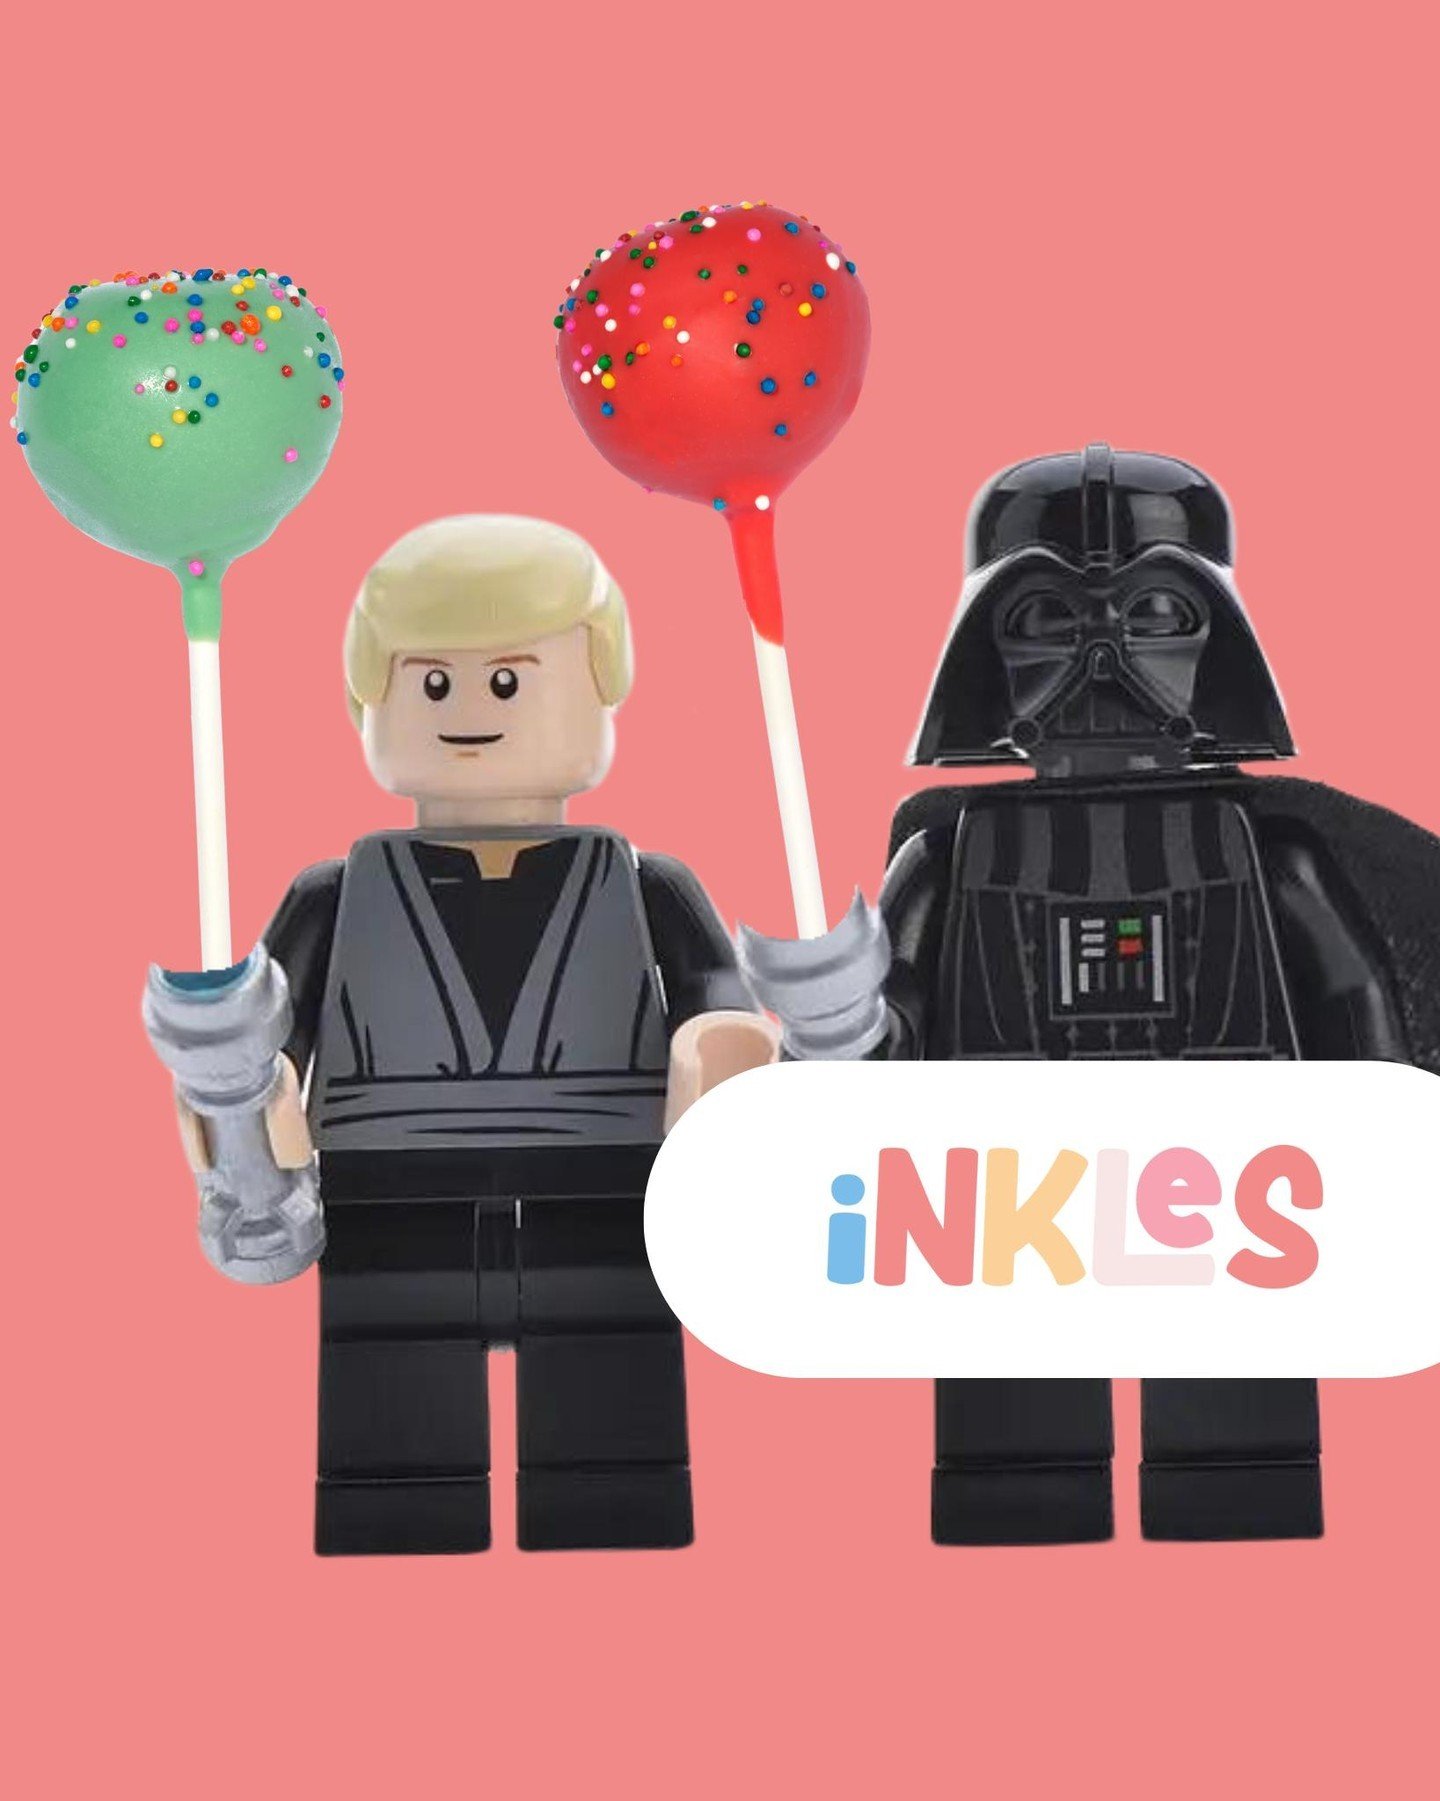 May the 4th be with you, cake pop jedis! Celebrate with sweet treats from a galaxy far, far away. 🍰✨ #CakePopForce #StarWarsDay